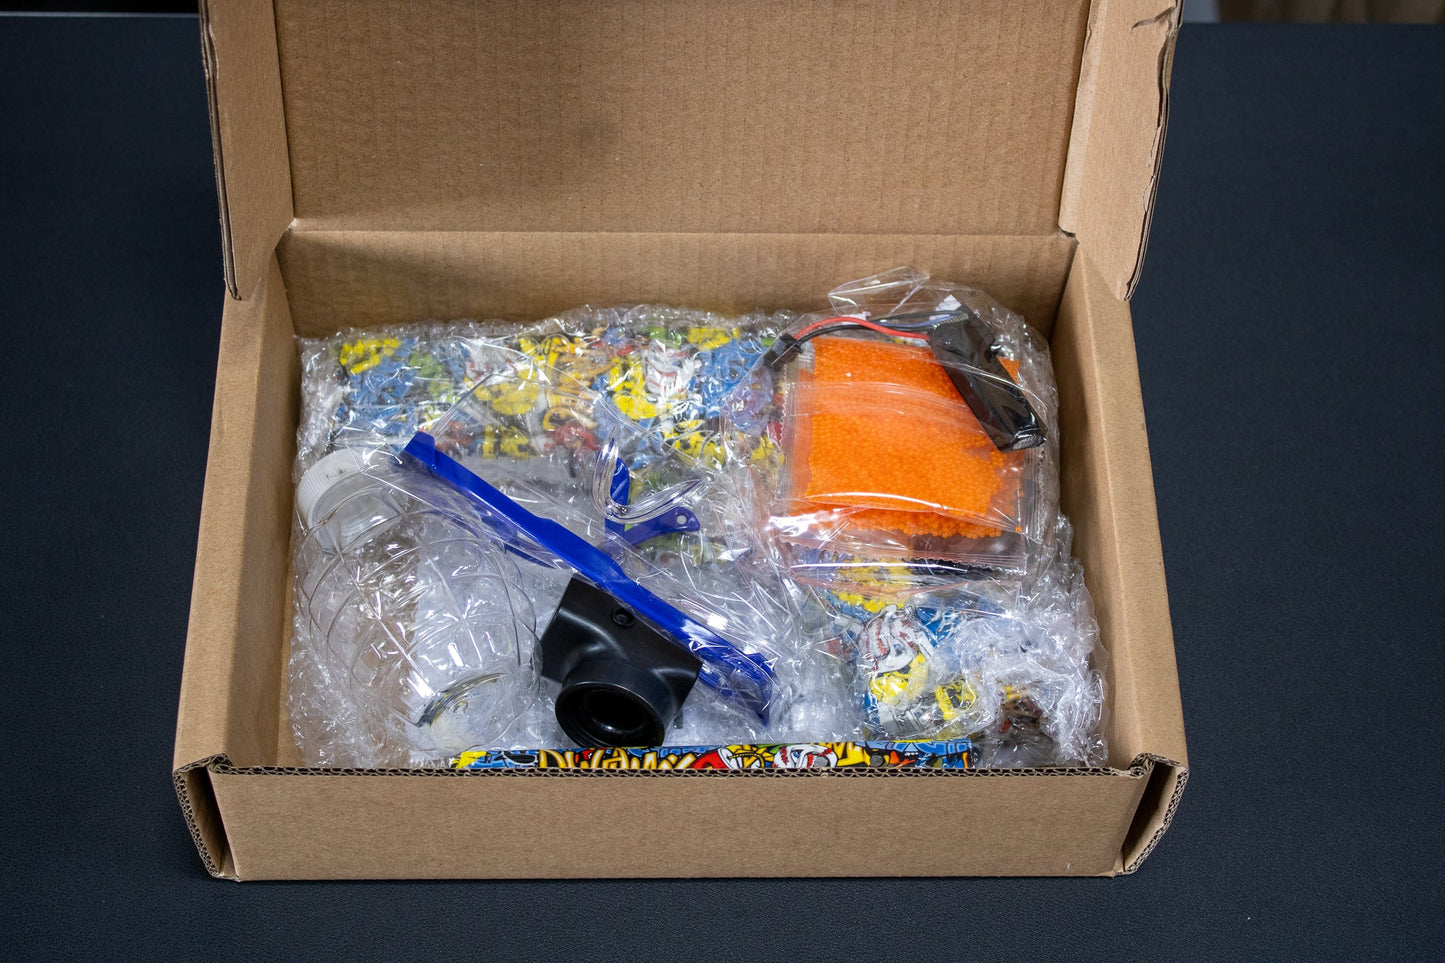 Auction for 1 Toy Water Gel Blasters, Colorful Design with Expansion gel, accessories and more! Eye Safety Gear Included